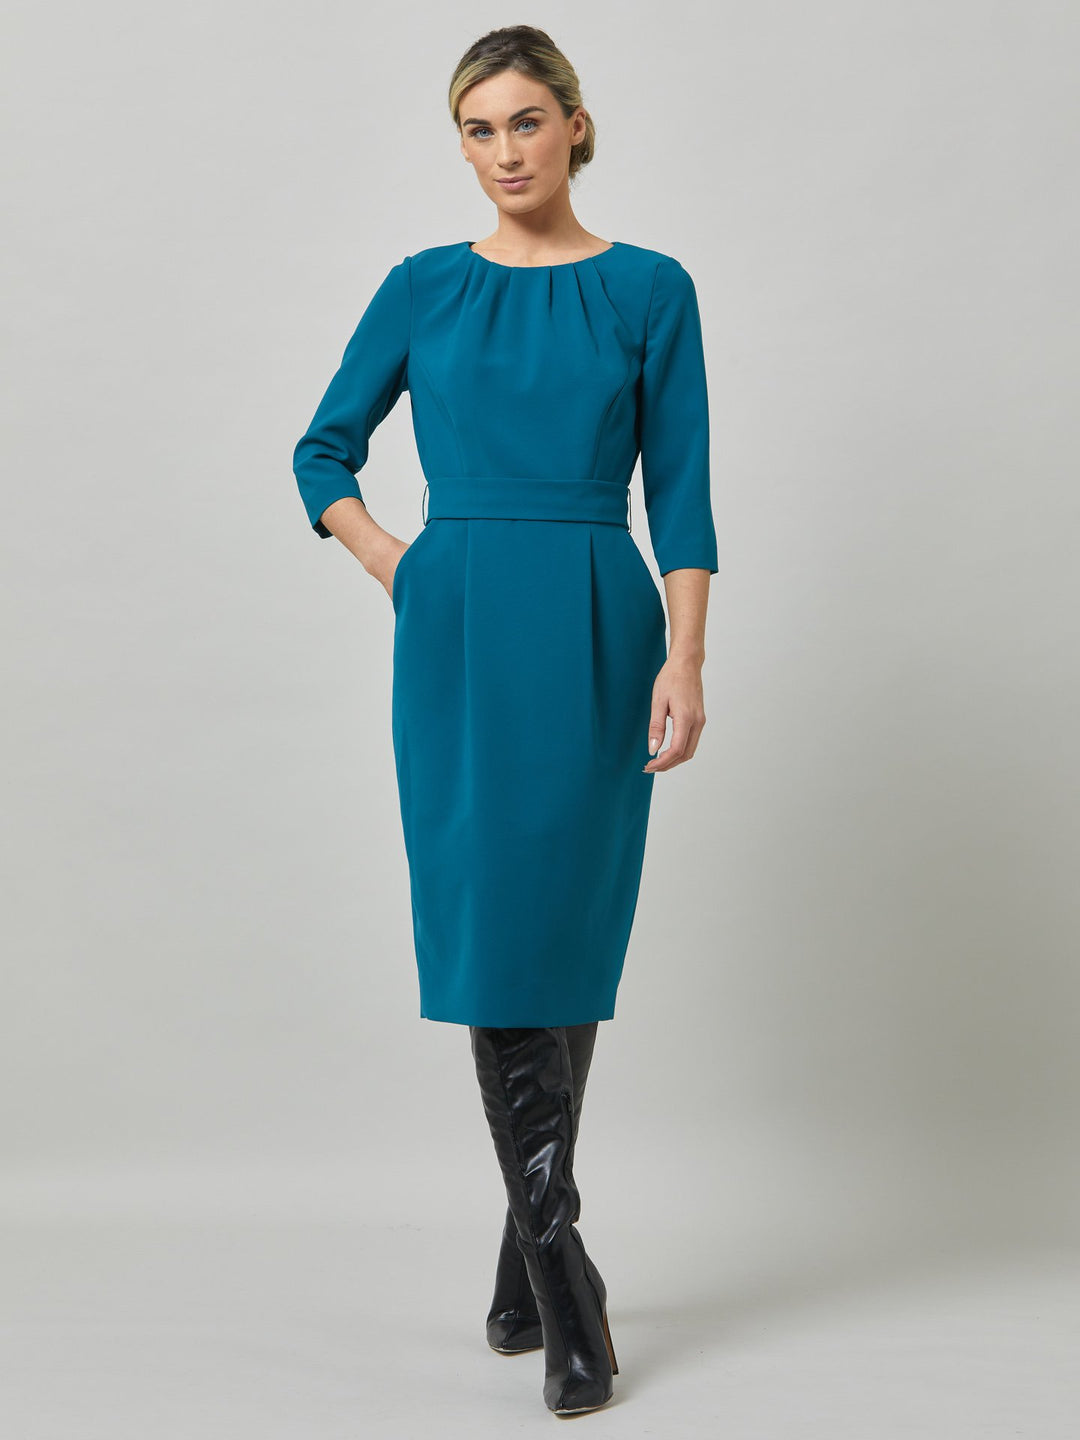 Nina is a fresh take on one of our key silhouettes. Note the softly pleated neckline and the elegant silhouette which hugs the frame around the hips and thighs for a flattering wear. Skirt falls to below the knee, fitted to the waist with handy pockets and detachable belt. Crafted in our signature crepe with a hint of stretch in atlantic teal. the perfect desk to dinner dress.